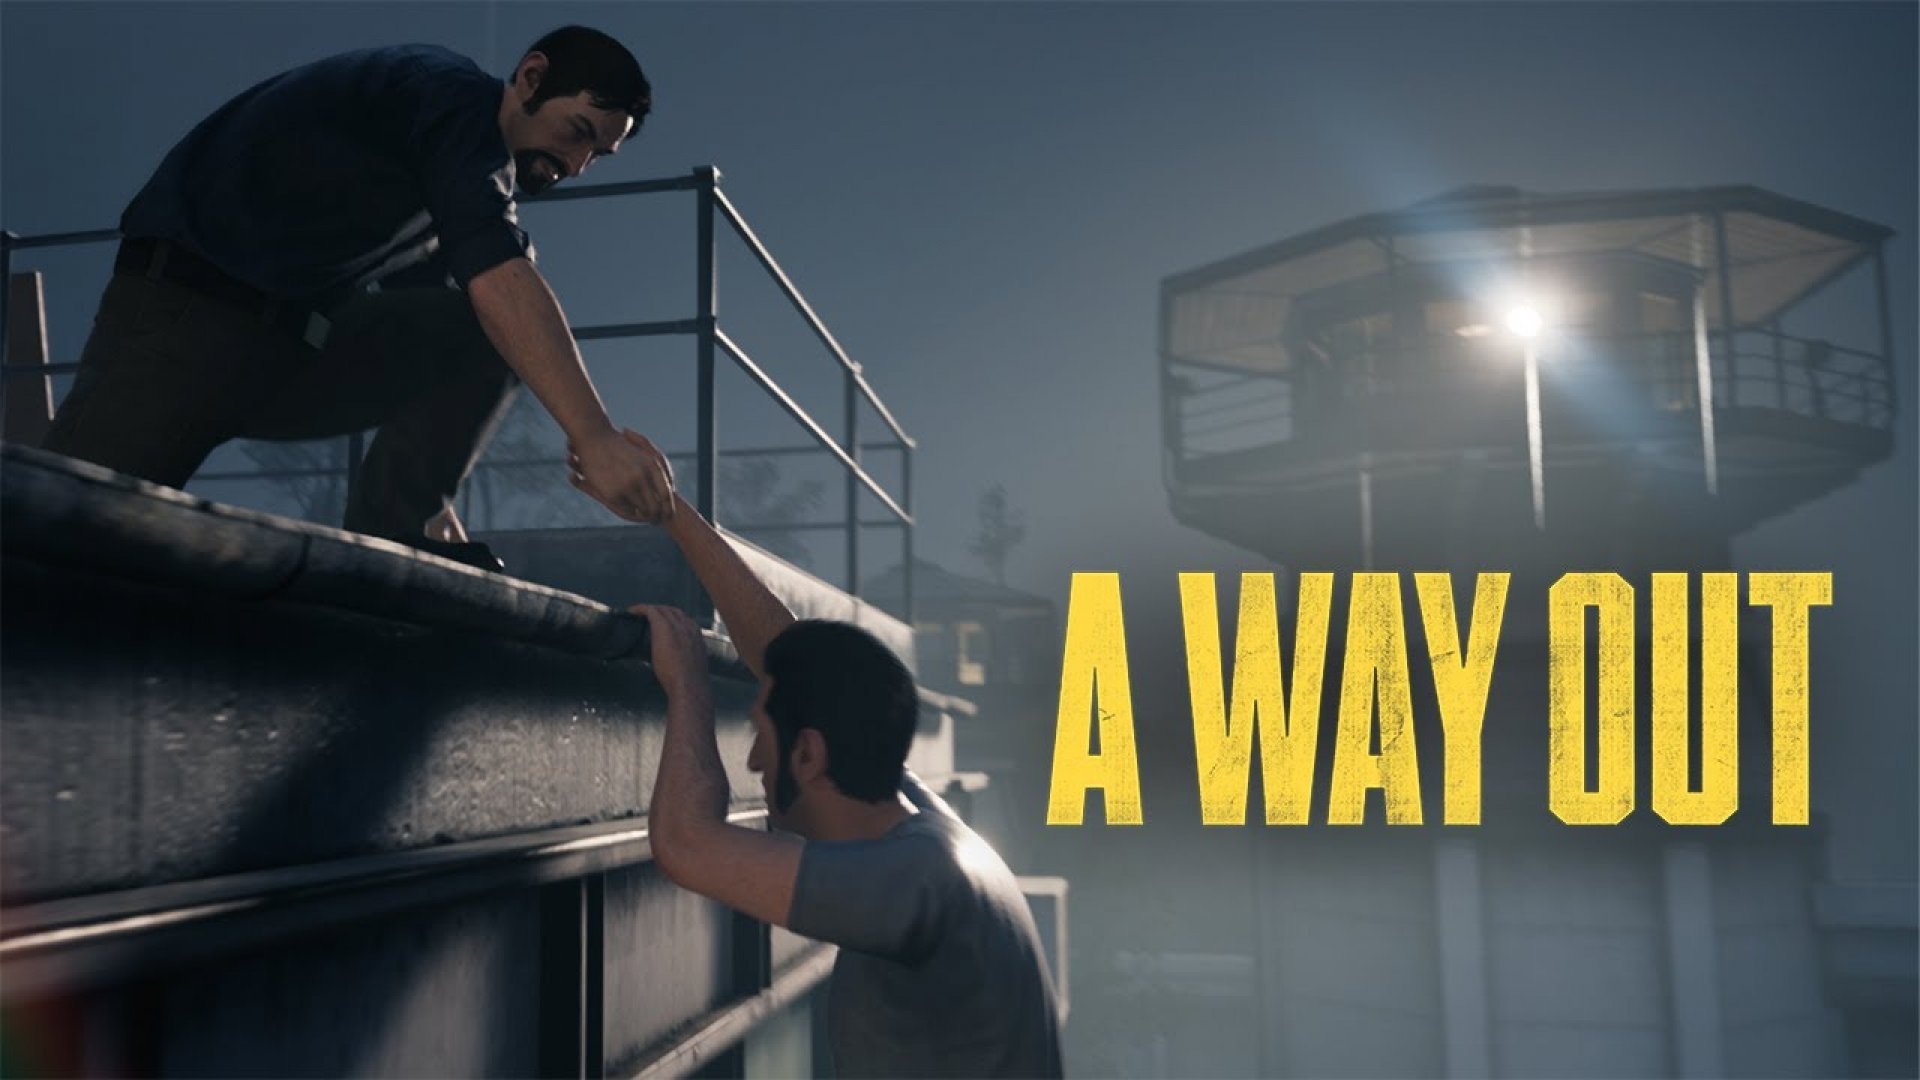 A way out джойстик. Way out игра. Побег из тюрьмы a way out. А Wаy оut игра. A way AOT.